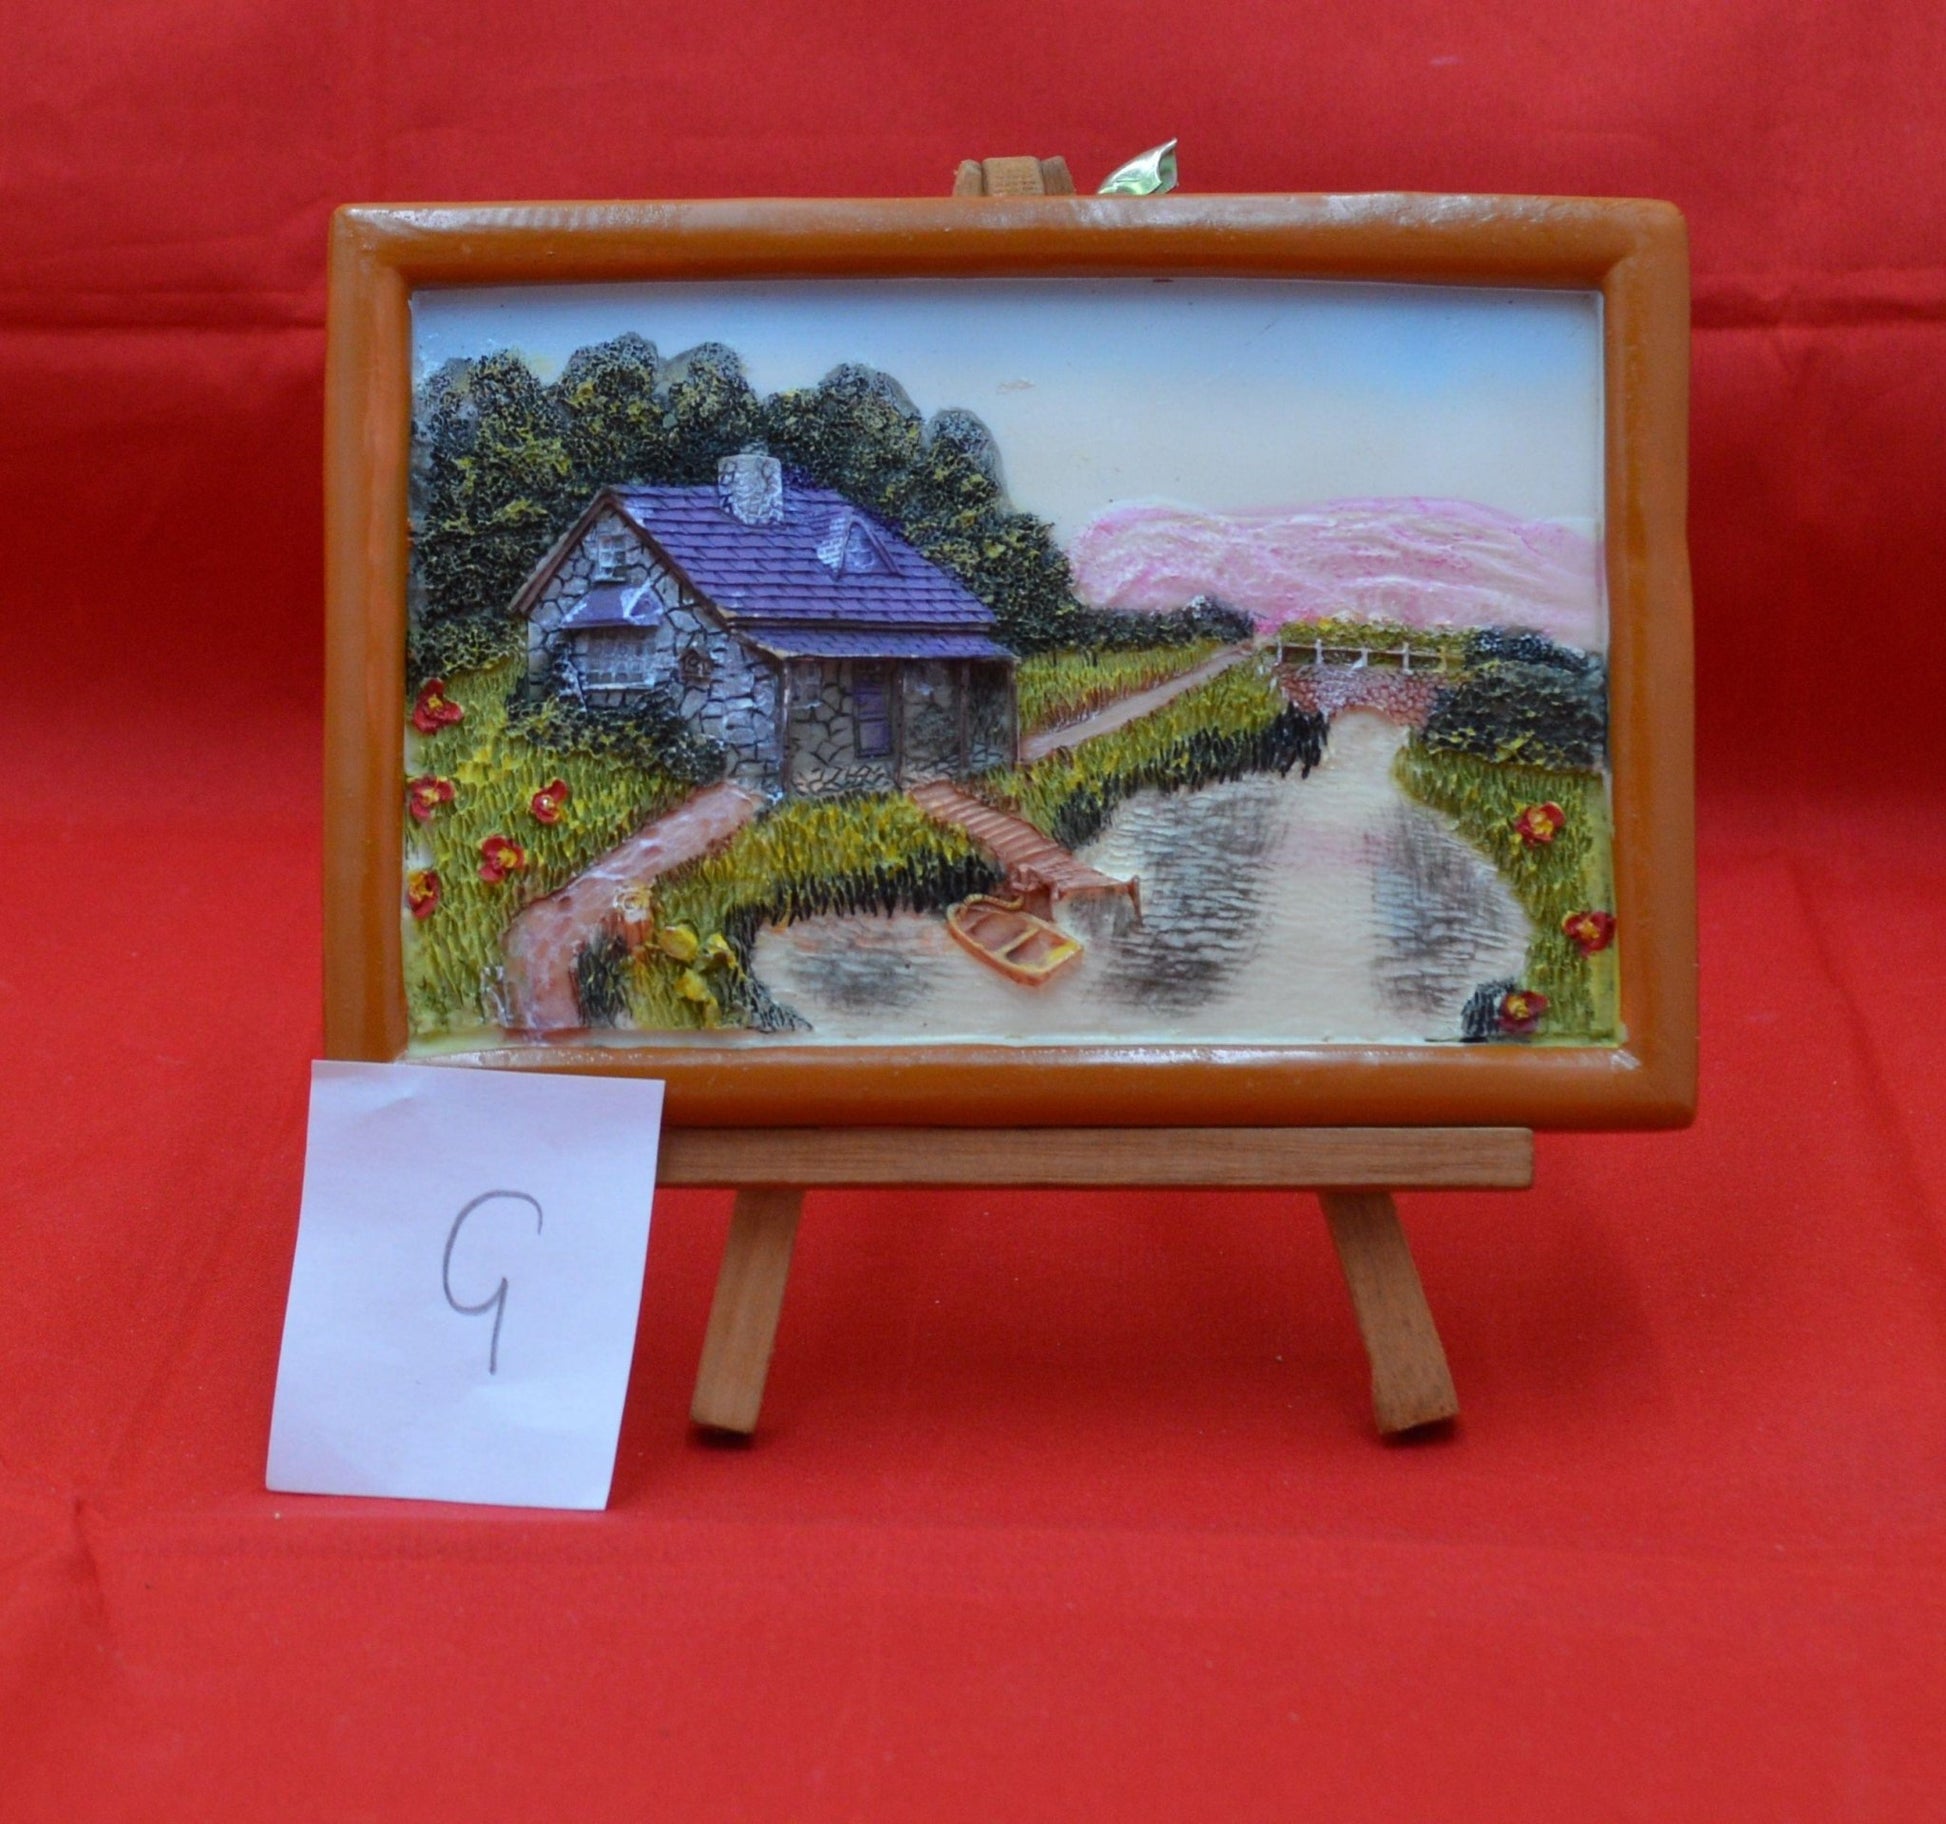 DECORATIVE ORNAMENT SCENIC RESIN PICTURE ON AN EASEL(PREVIOUSLY OWNED) GOOD CONDITION - TMD167207